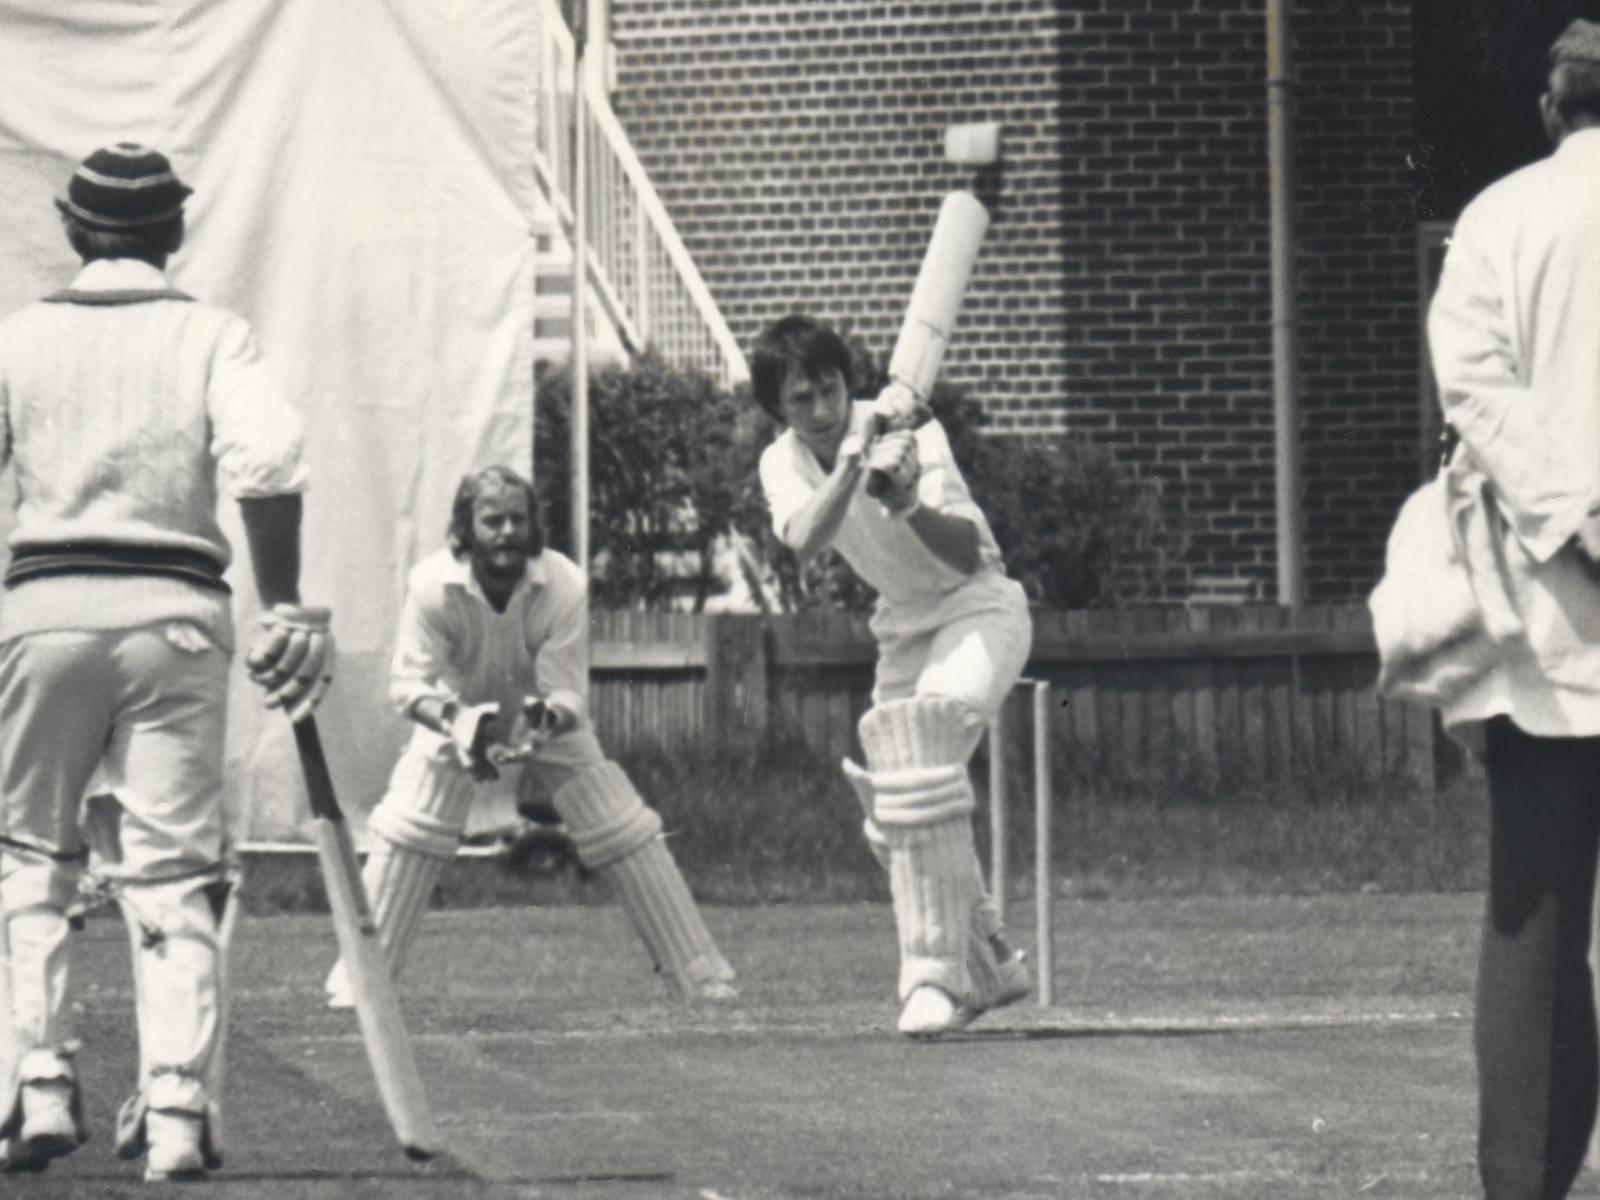 From the archive ... John Tolliday batting for Exeter against South Devon in the early 1970s, the same time he was playing for the Civil Service team 